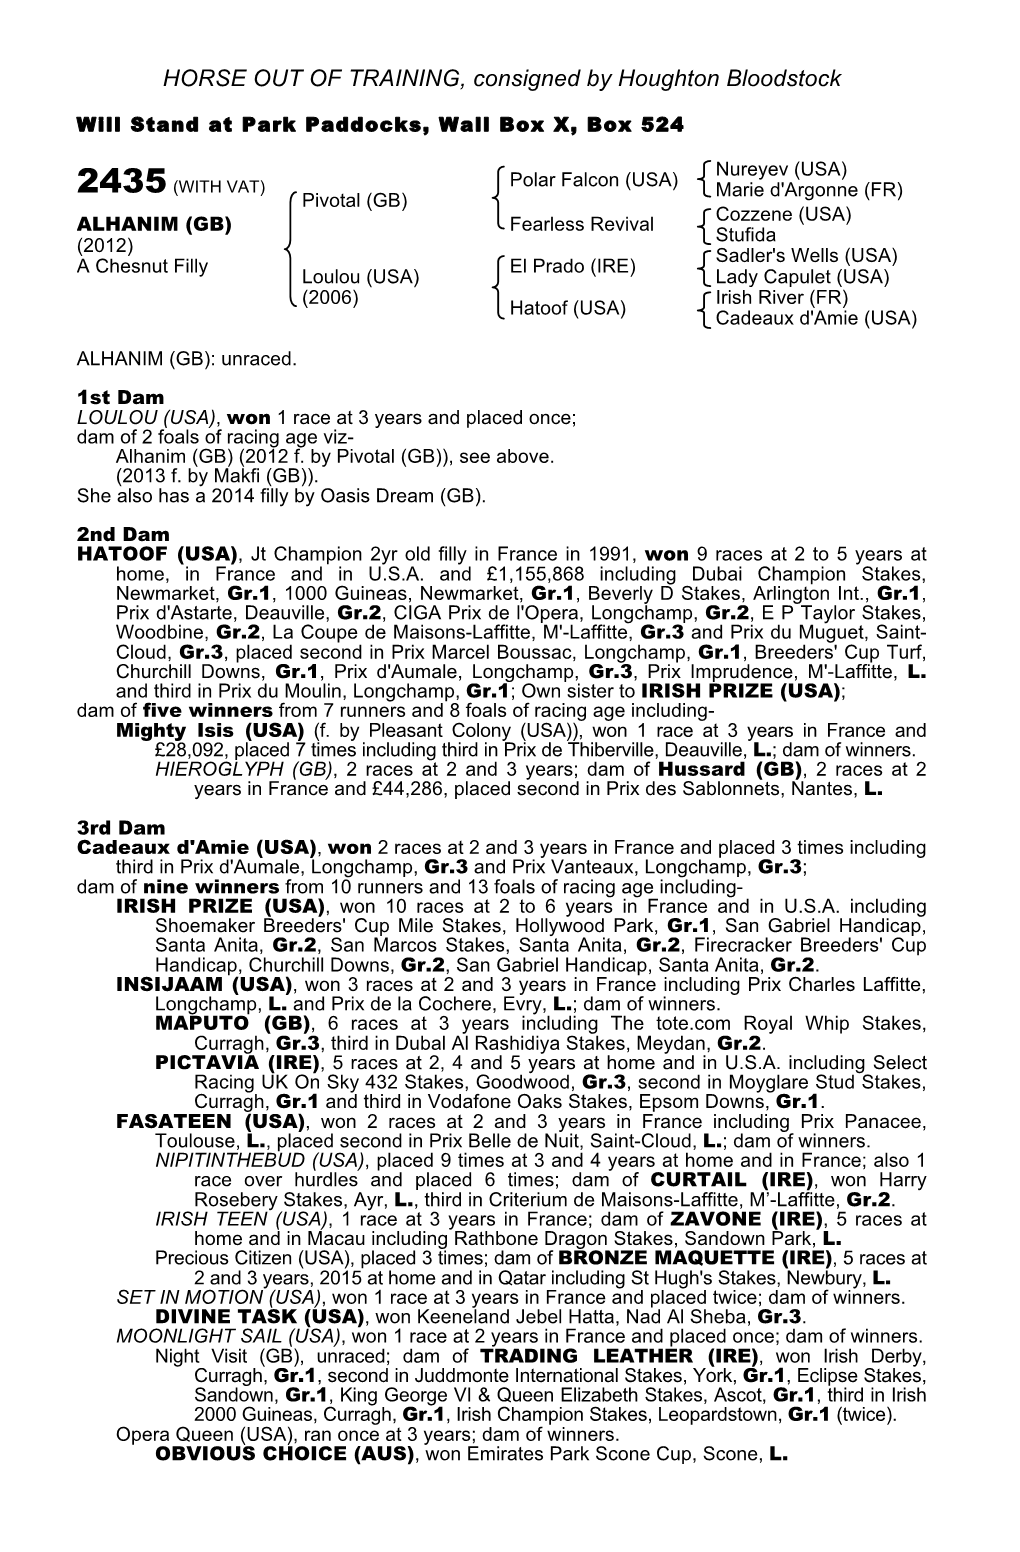 HORSE out of TRAINING, Consigned by Houghton Bloodstock